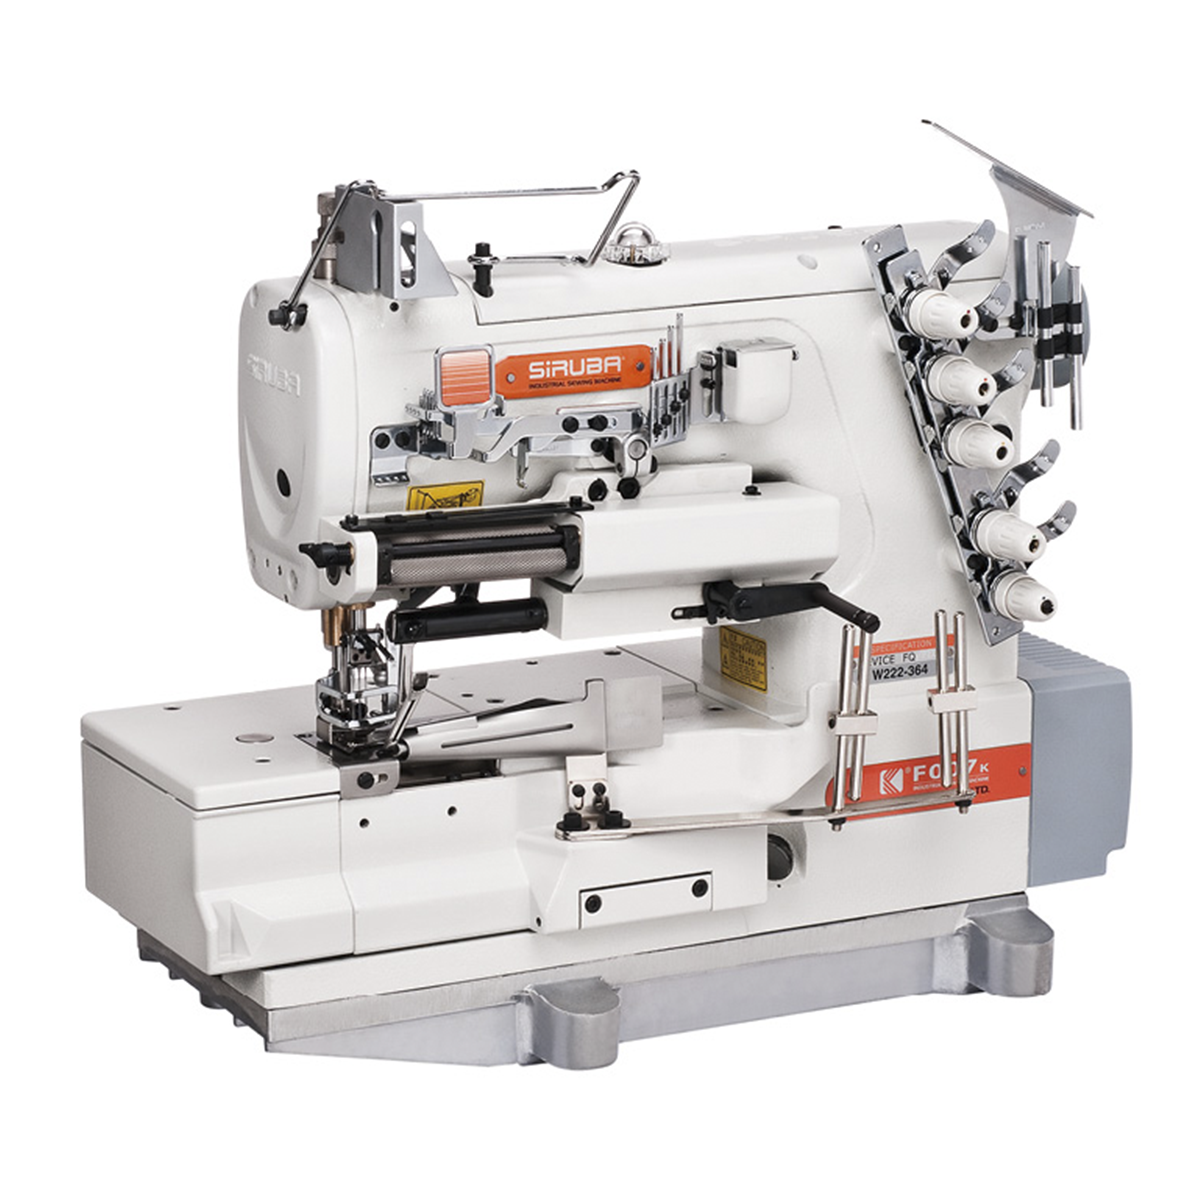 SIRUBA F007K-W222-356/FQ 3 Needle Flatbed Coverstitch with Binding Device Industrial Sewing Machine Assembled with Table and Servo Motor Included